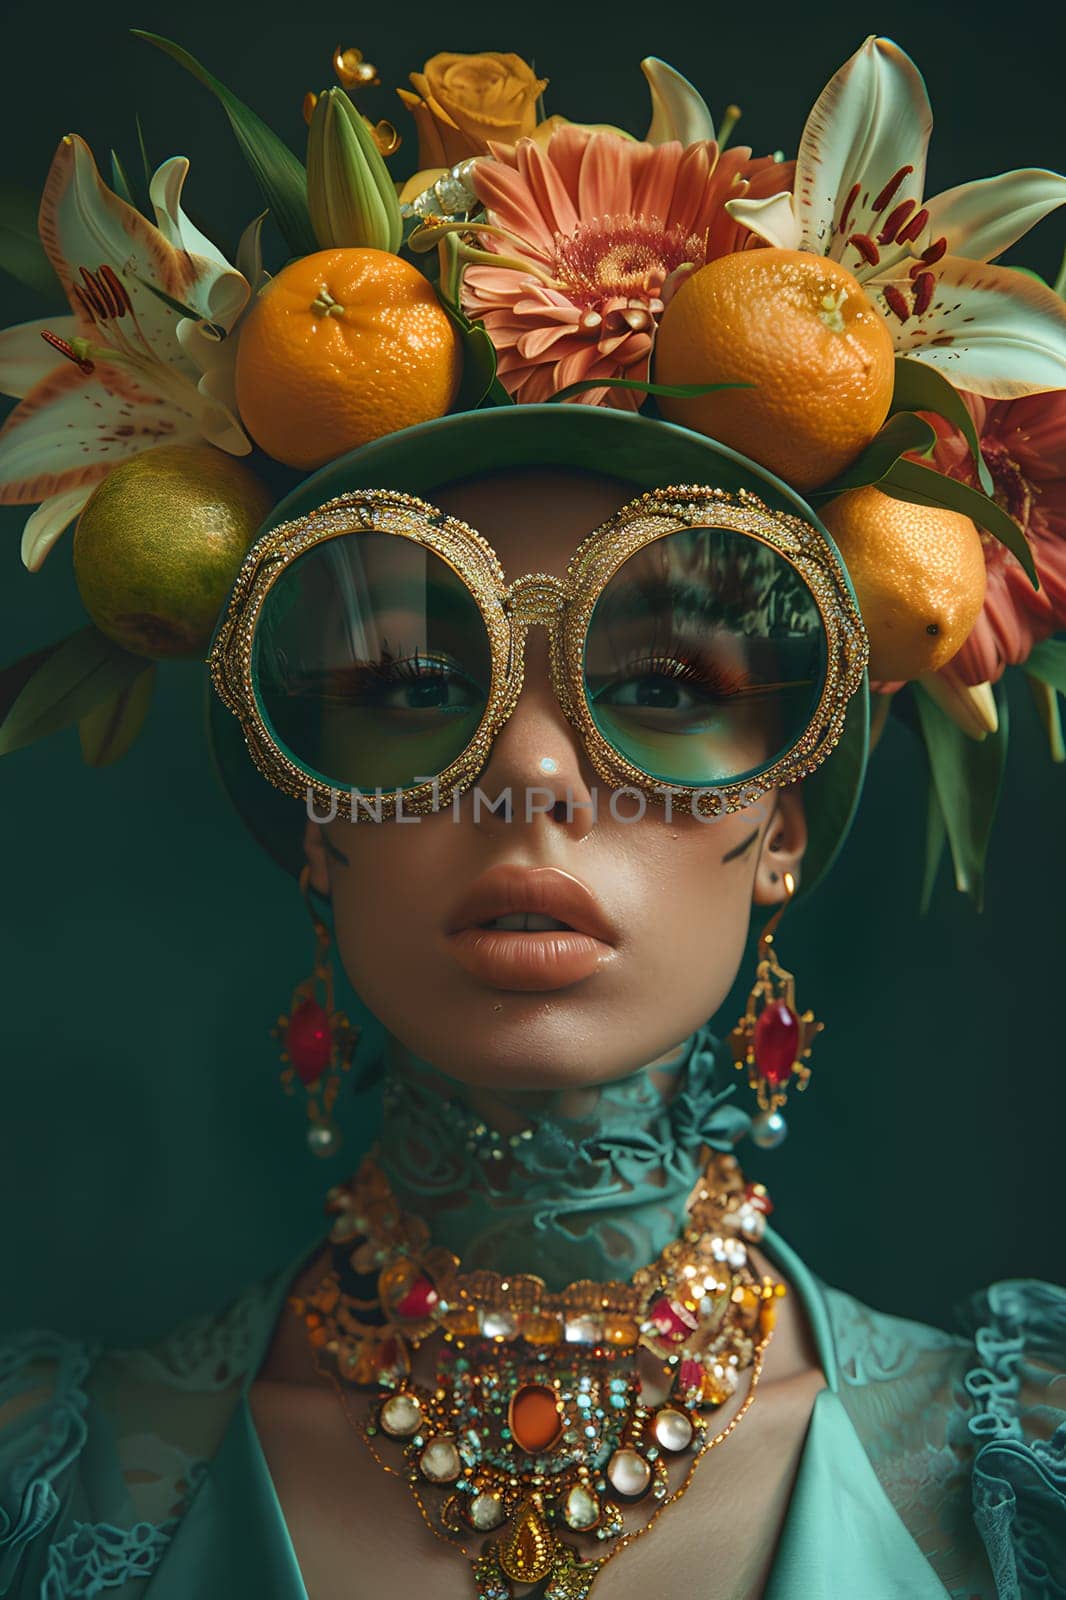 A stylish woman with sunglasses and a hat adorned with flowers. Her eyewear adds a touch of glamour to her ensemble, embodying both fashion design and vision care